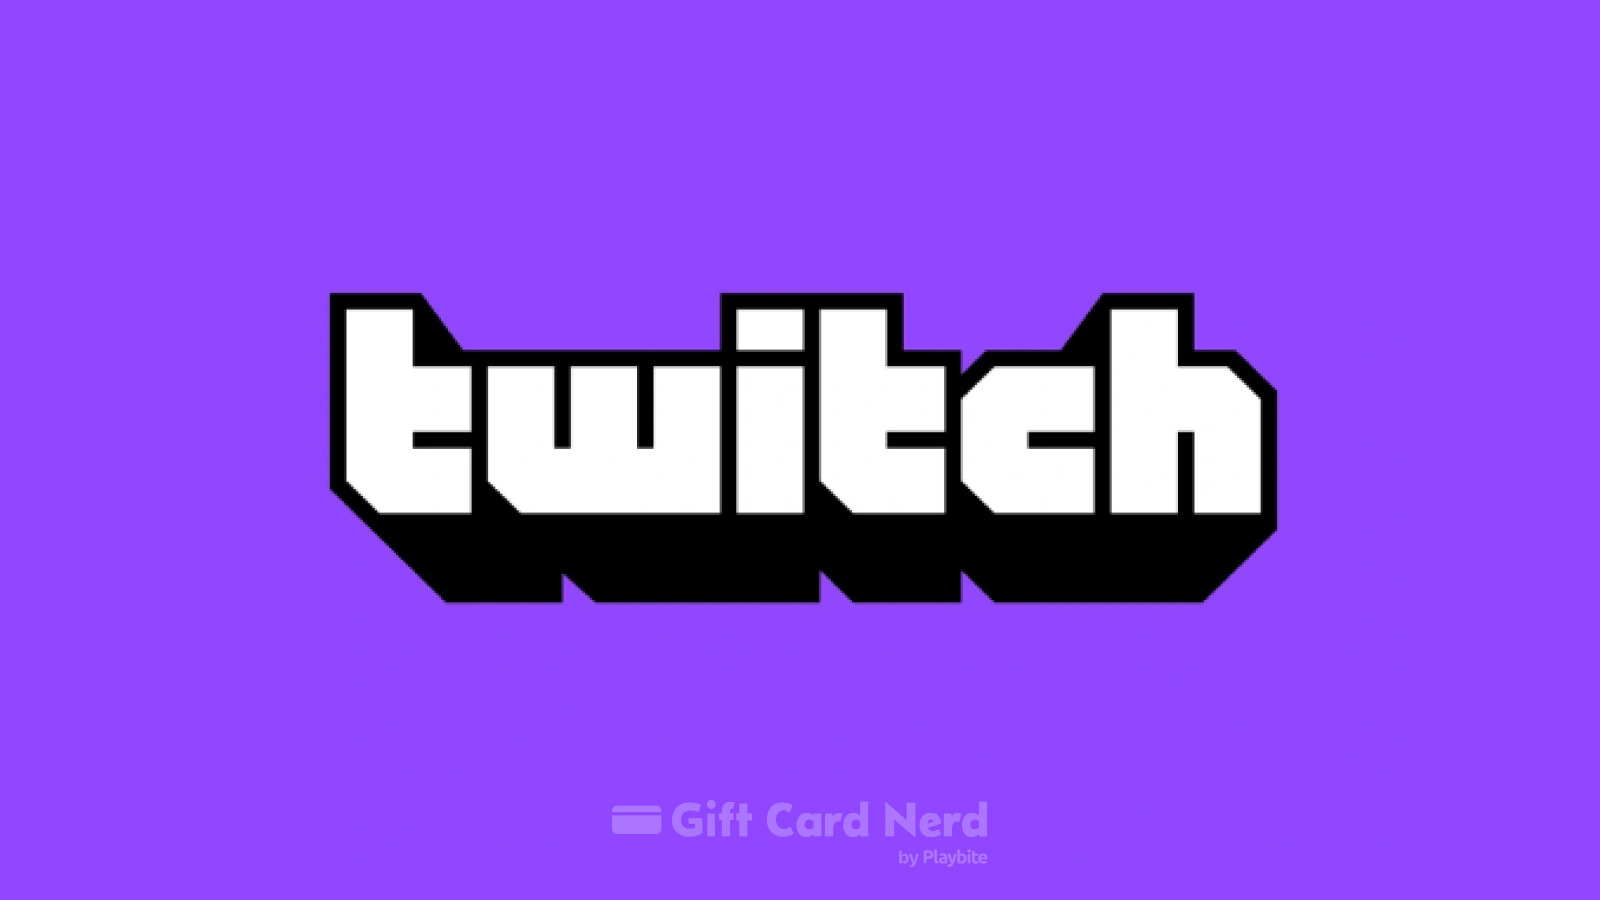 Can I Use a Twitch Gift Card on DoorDash?